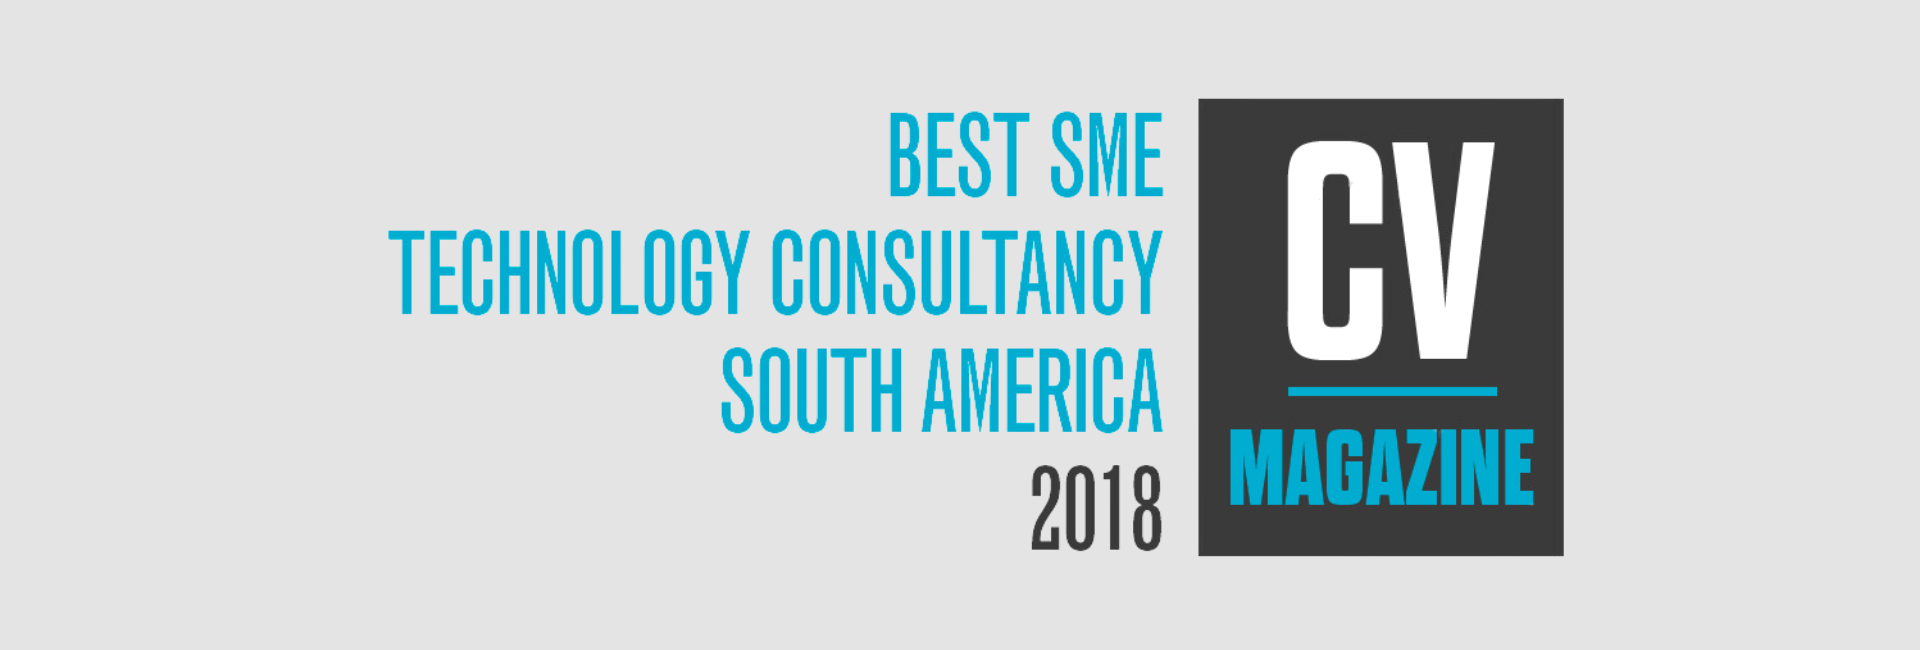 Kaizen Softworks Best SME Technology Consultancy in South America